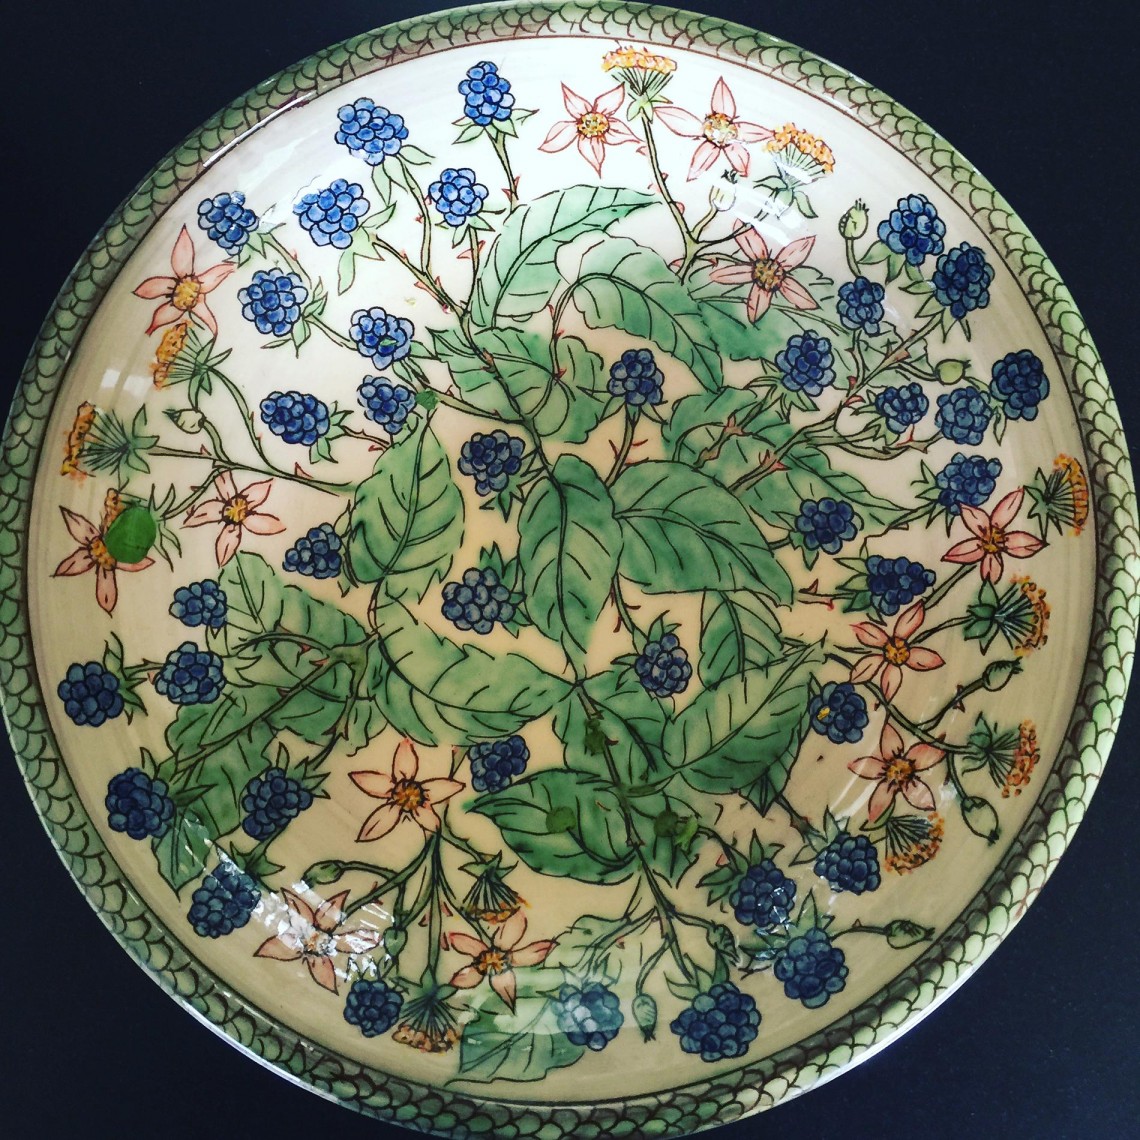 A hand painted pottery charger decorated wild bramble leaves, brambles and pink and yellow wildflowers. Handmade by Peter Thomas of Tower House Pottery, Berwick Upon Tweed, Northumberland